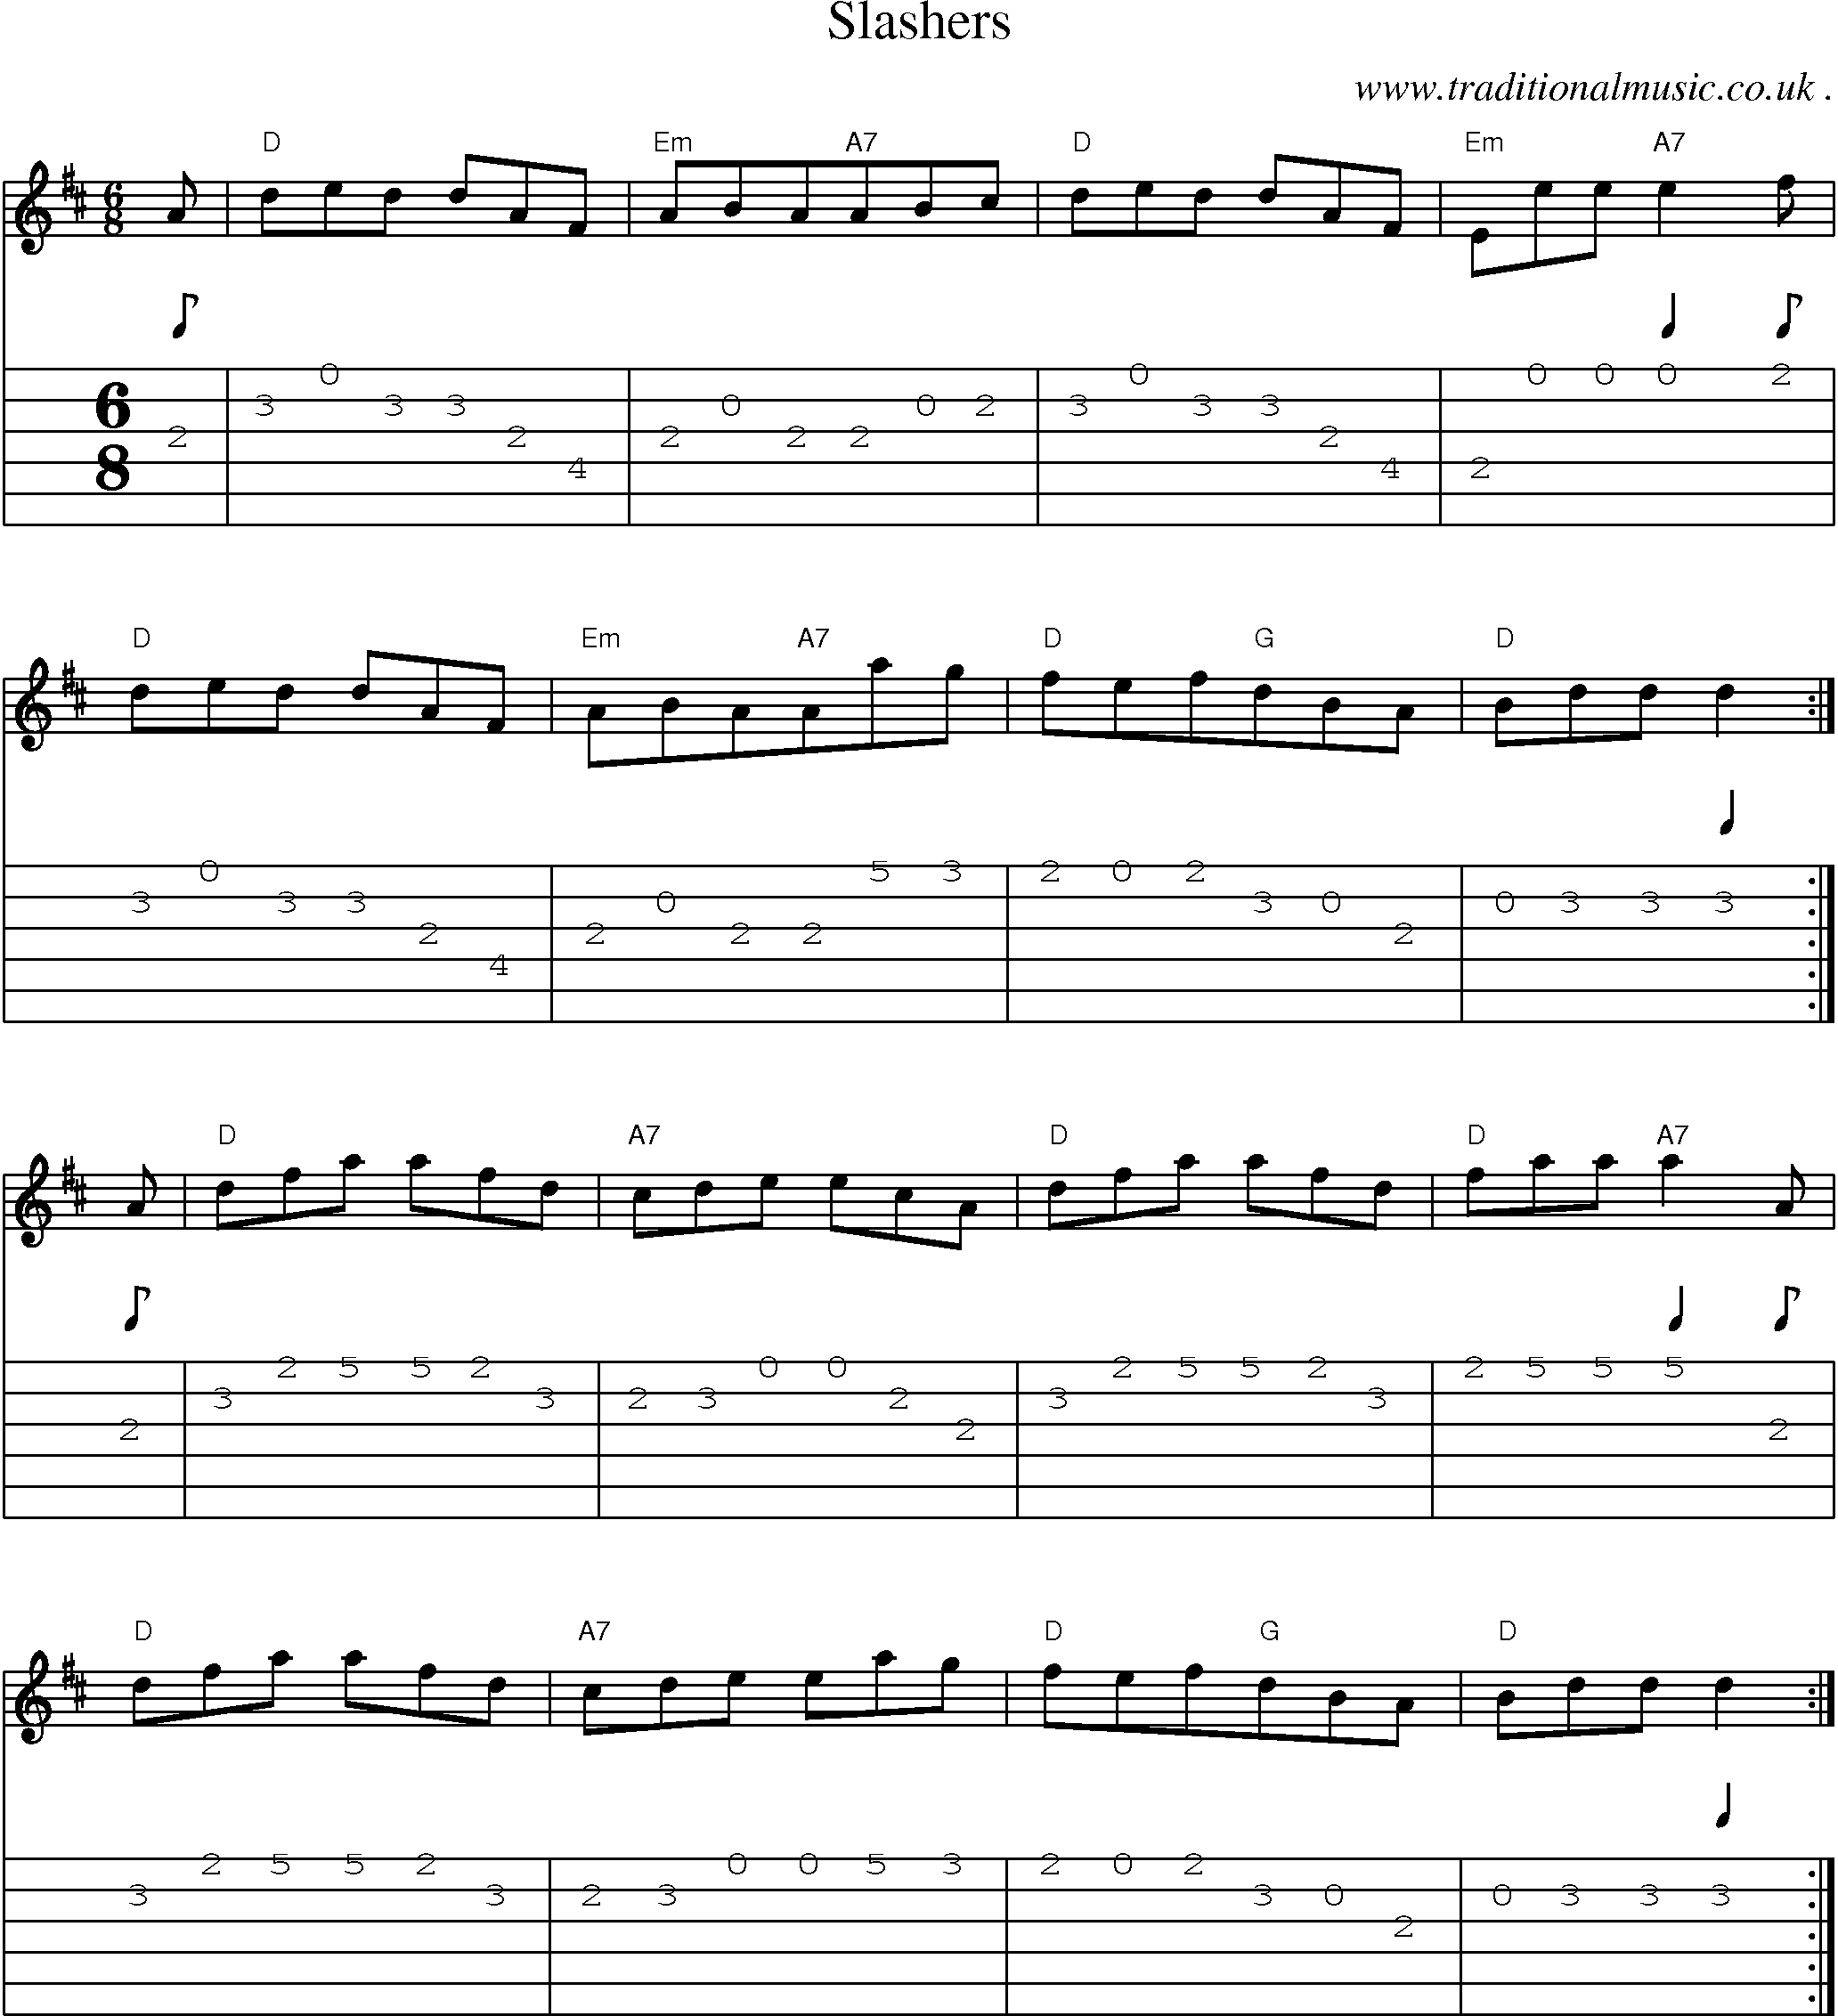 Sheet-Music and Guitar Tabs for Slashers